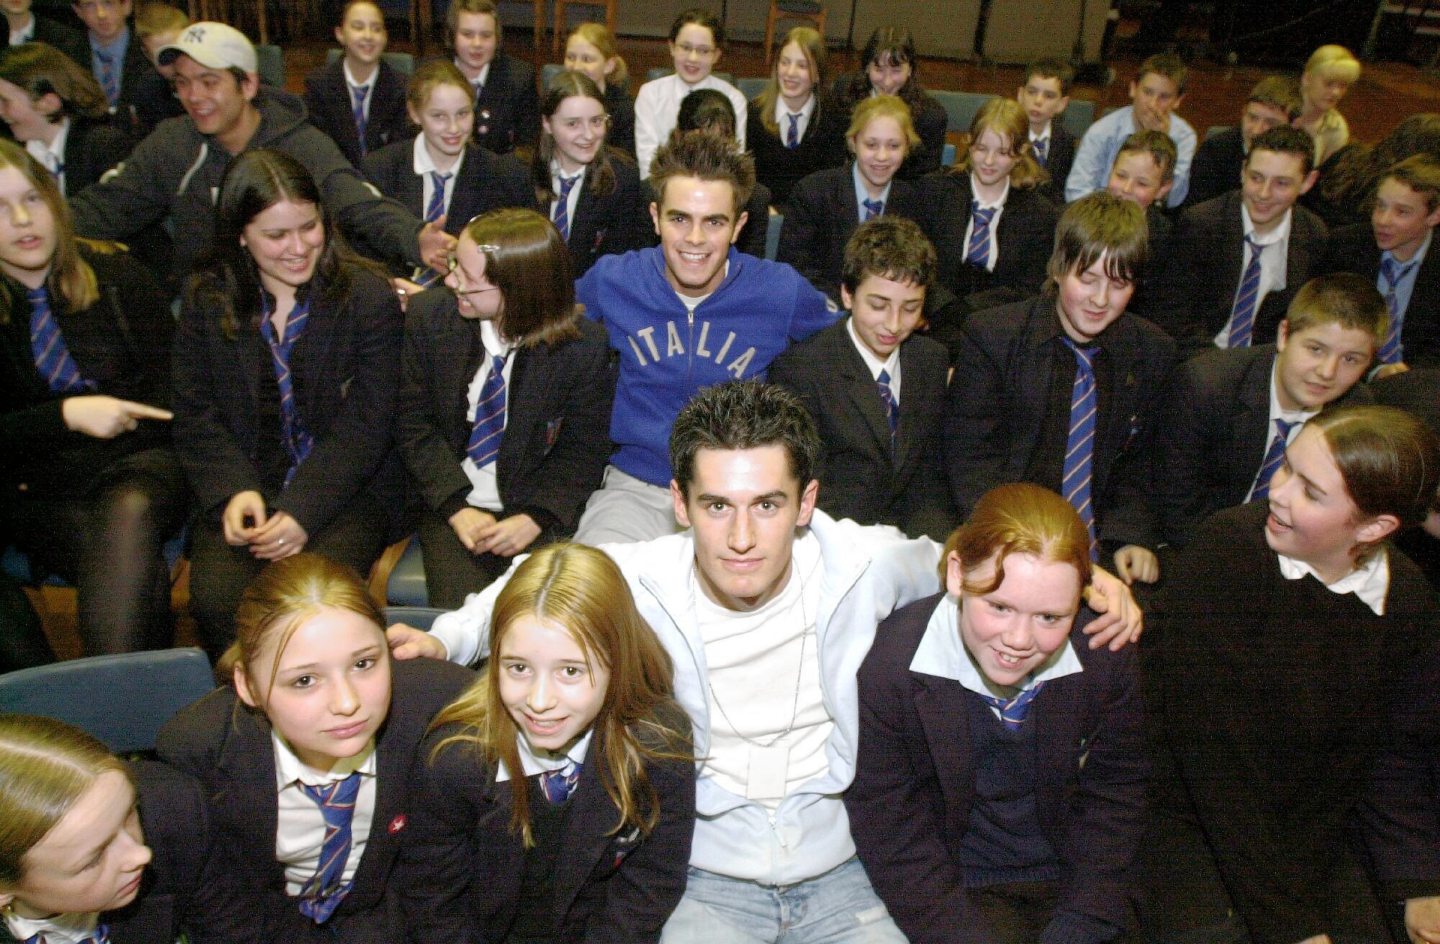 Pupils with members of D'side at a drugs awareness concert at the school in 2002.